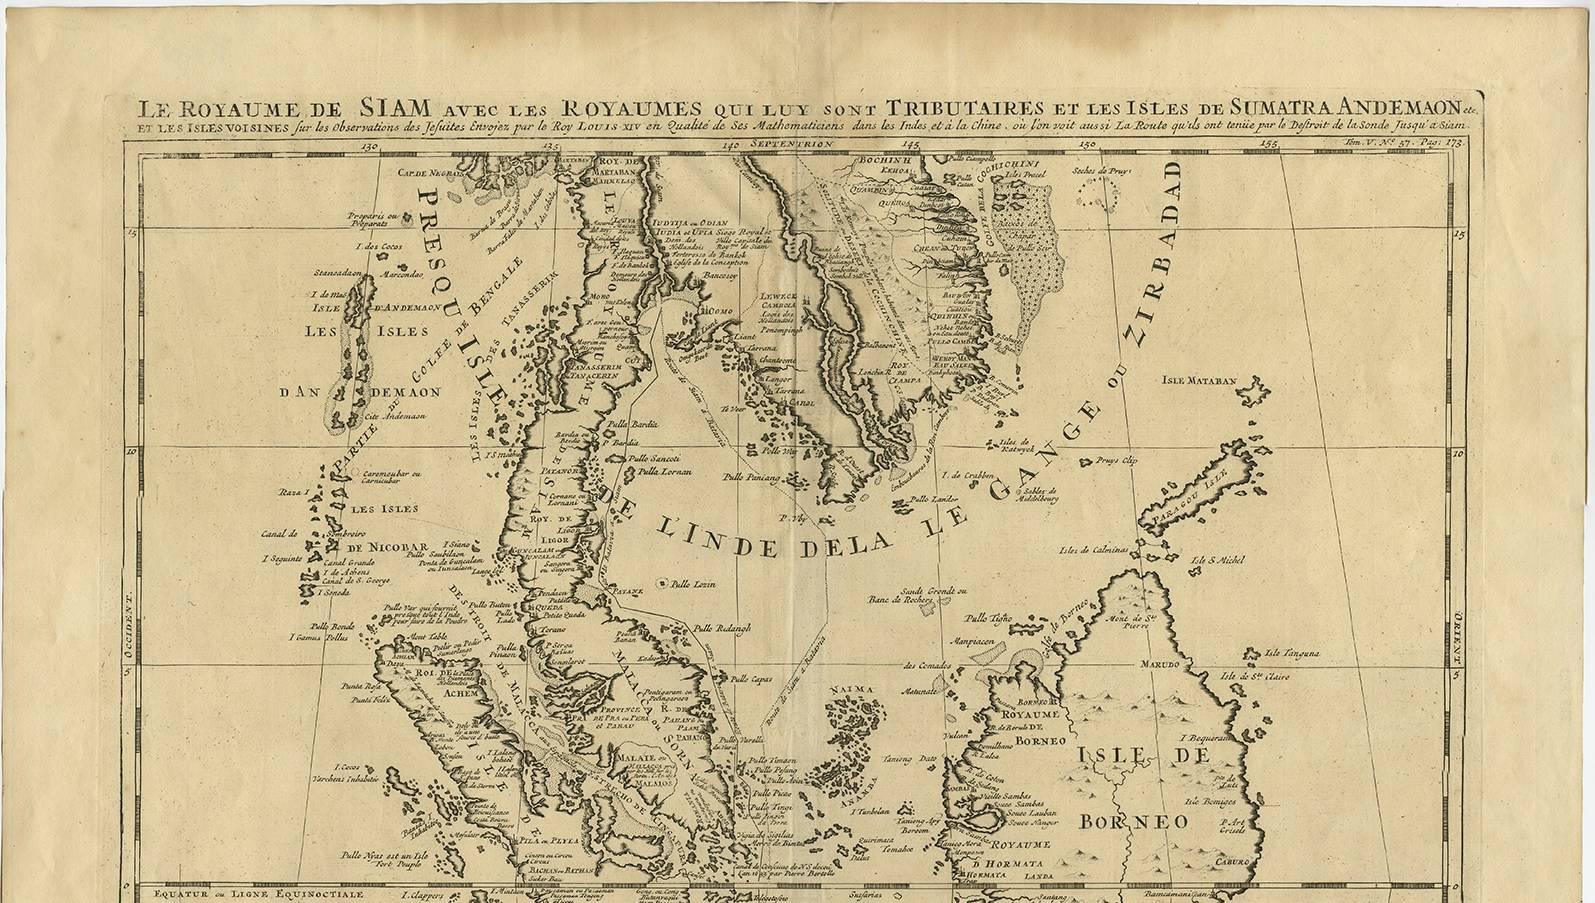 Antique map titled 'Le Royaume de Siam aves les Royaumes qui luy sont Tributaires et les Isles de Sumatra Andemaon'. Influential map of Southeast Asia, including modern day Thailand, southern Vietnam, Cambodia, Malaysia, Singapore, Borneo, Sumatra